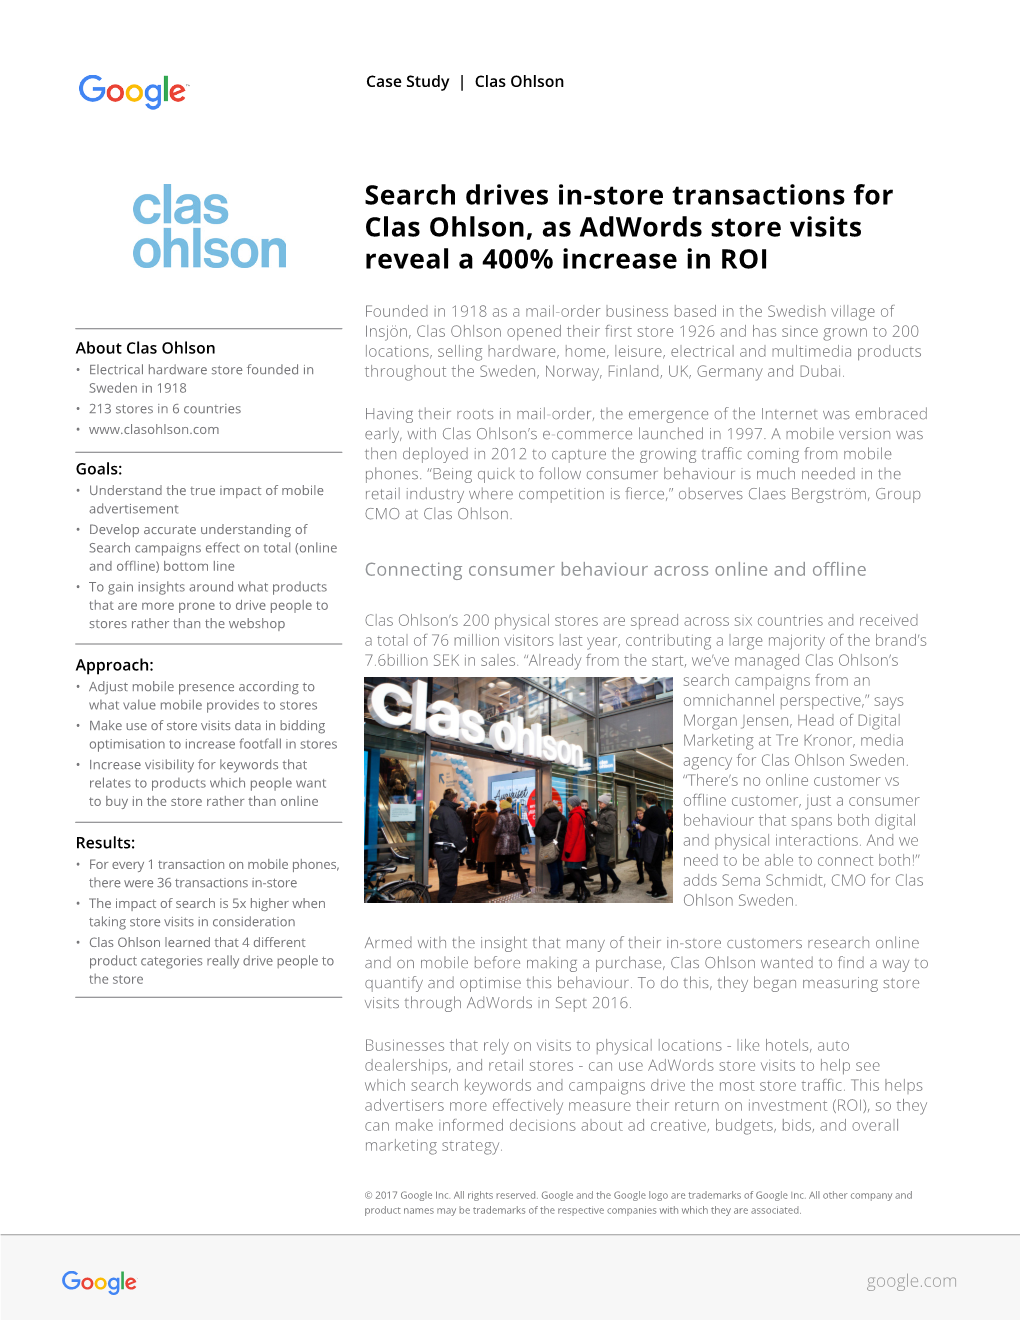 Search Drives In-Store Transactions for Clas Ohlson, As Adwords Store Visits Reveal a 400% Increase in ROI